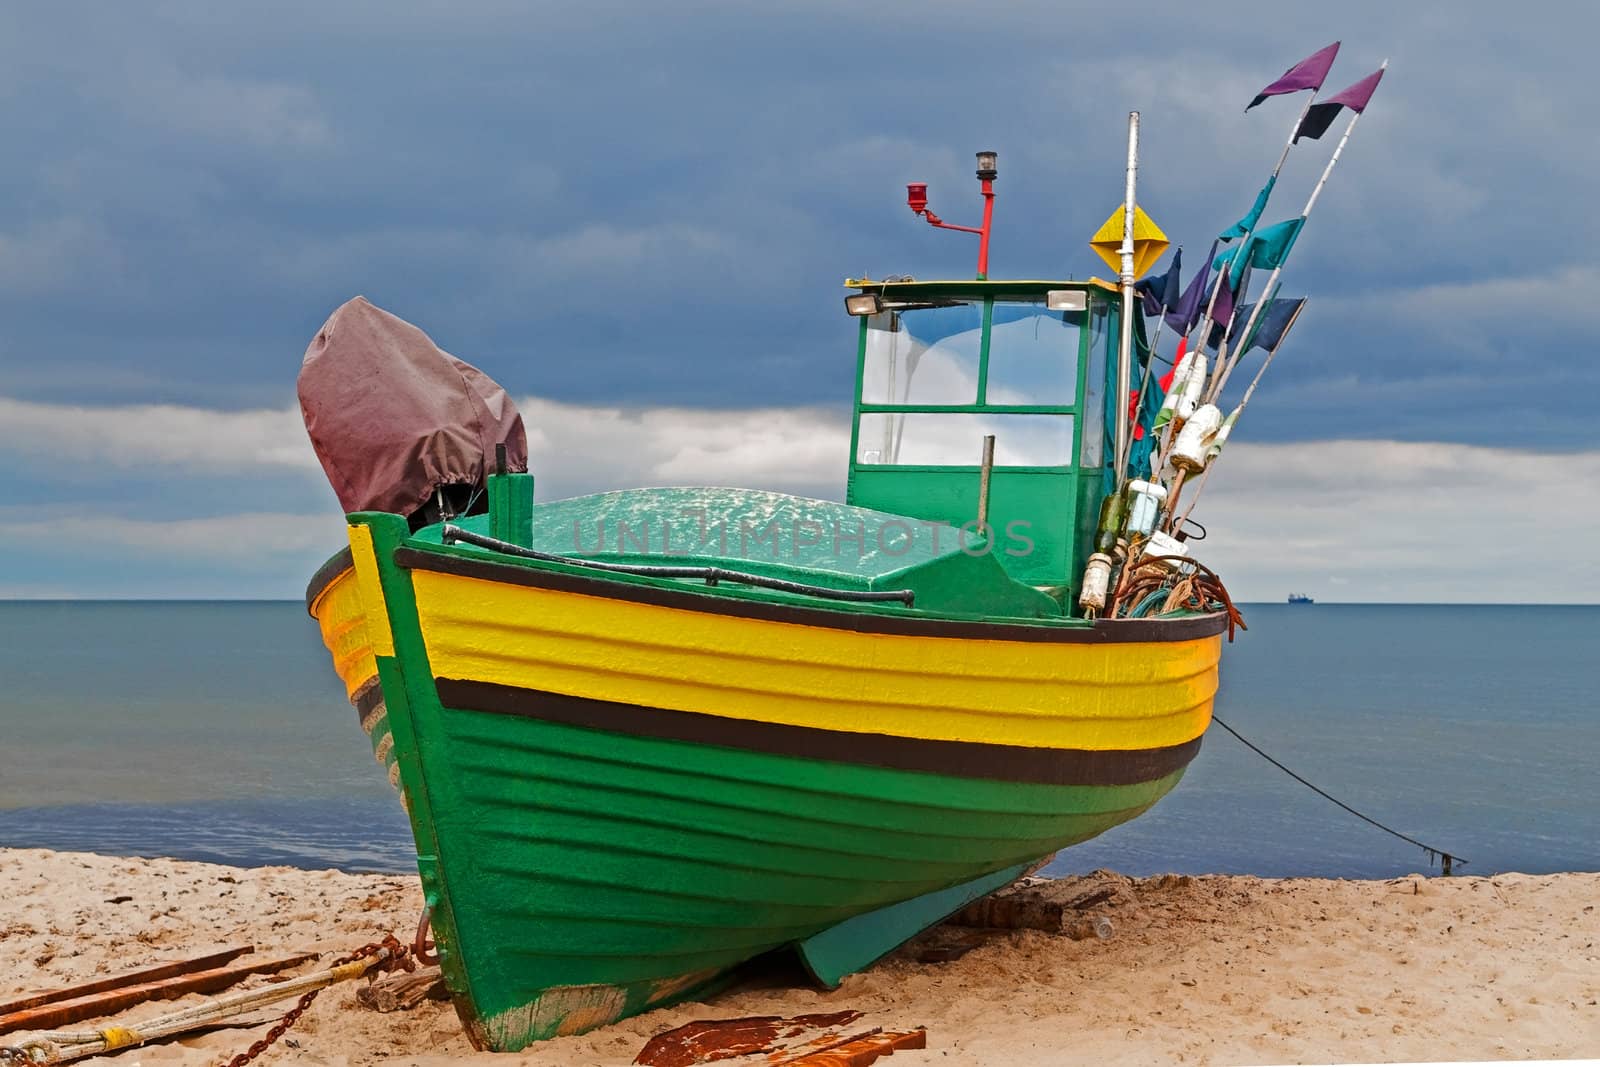 A fishing boat at the seaside